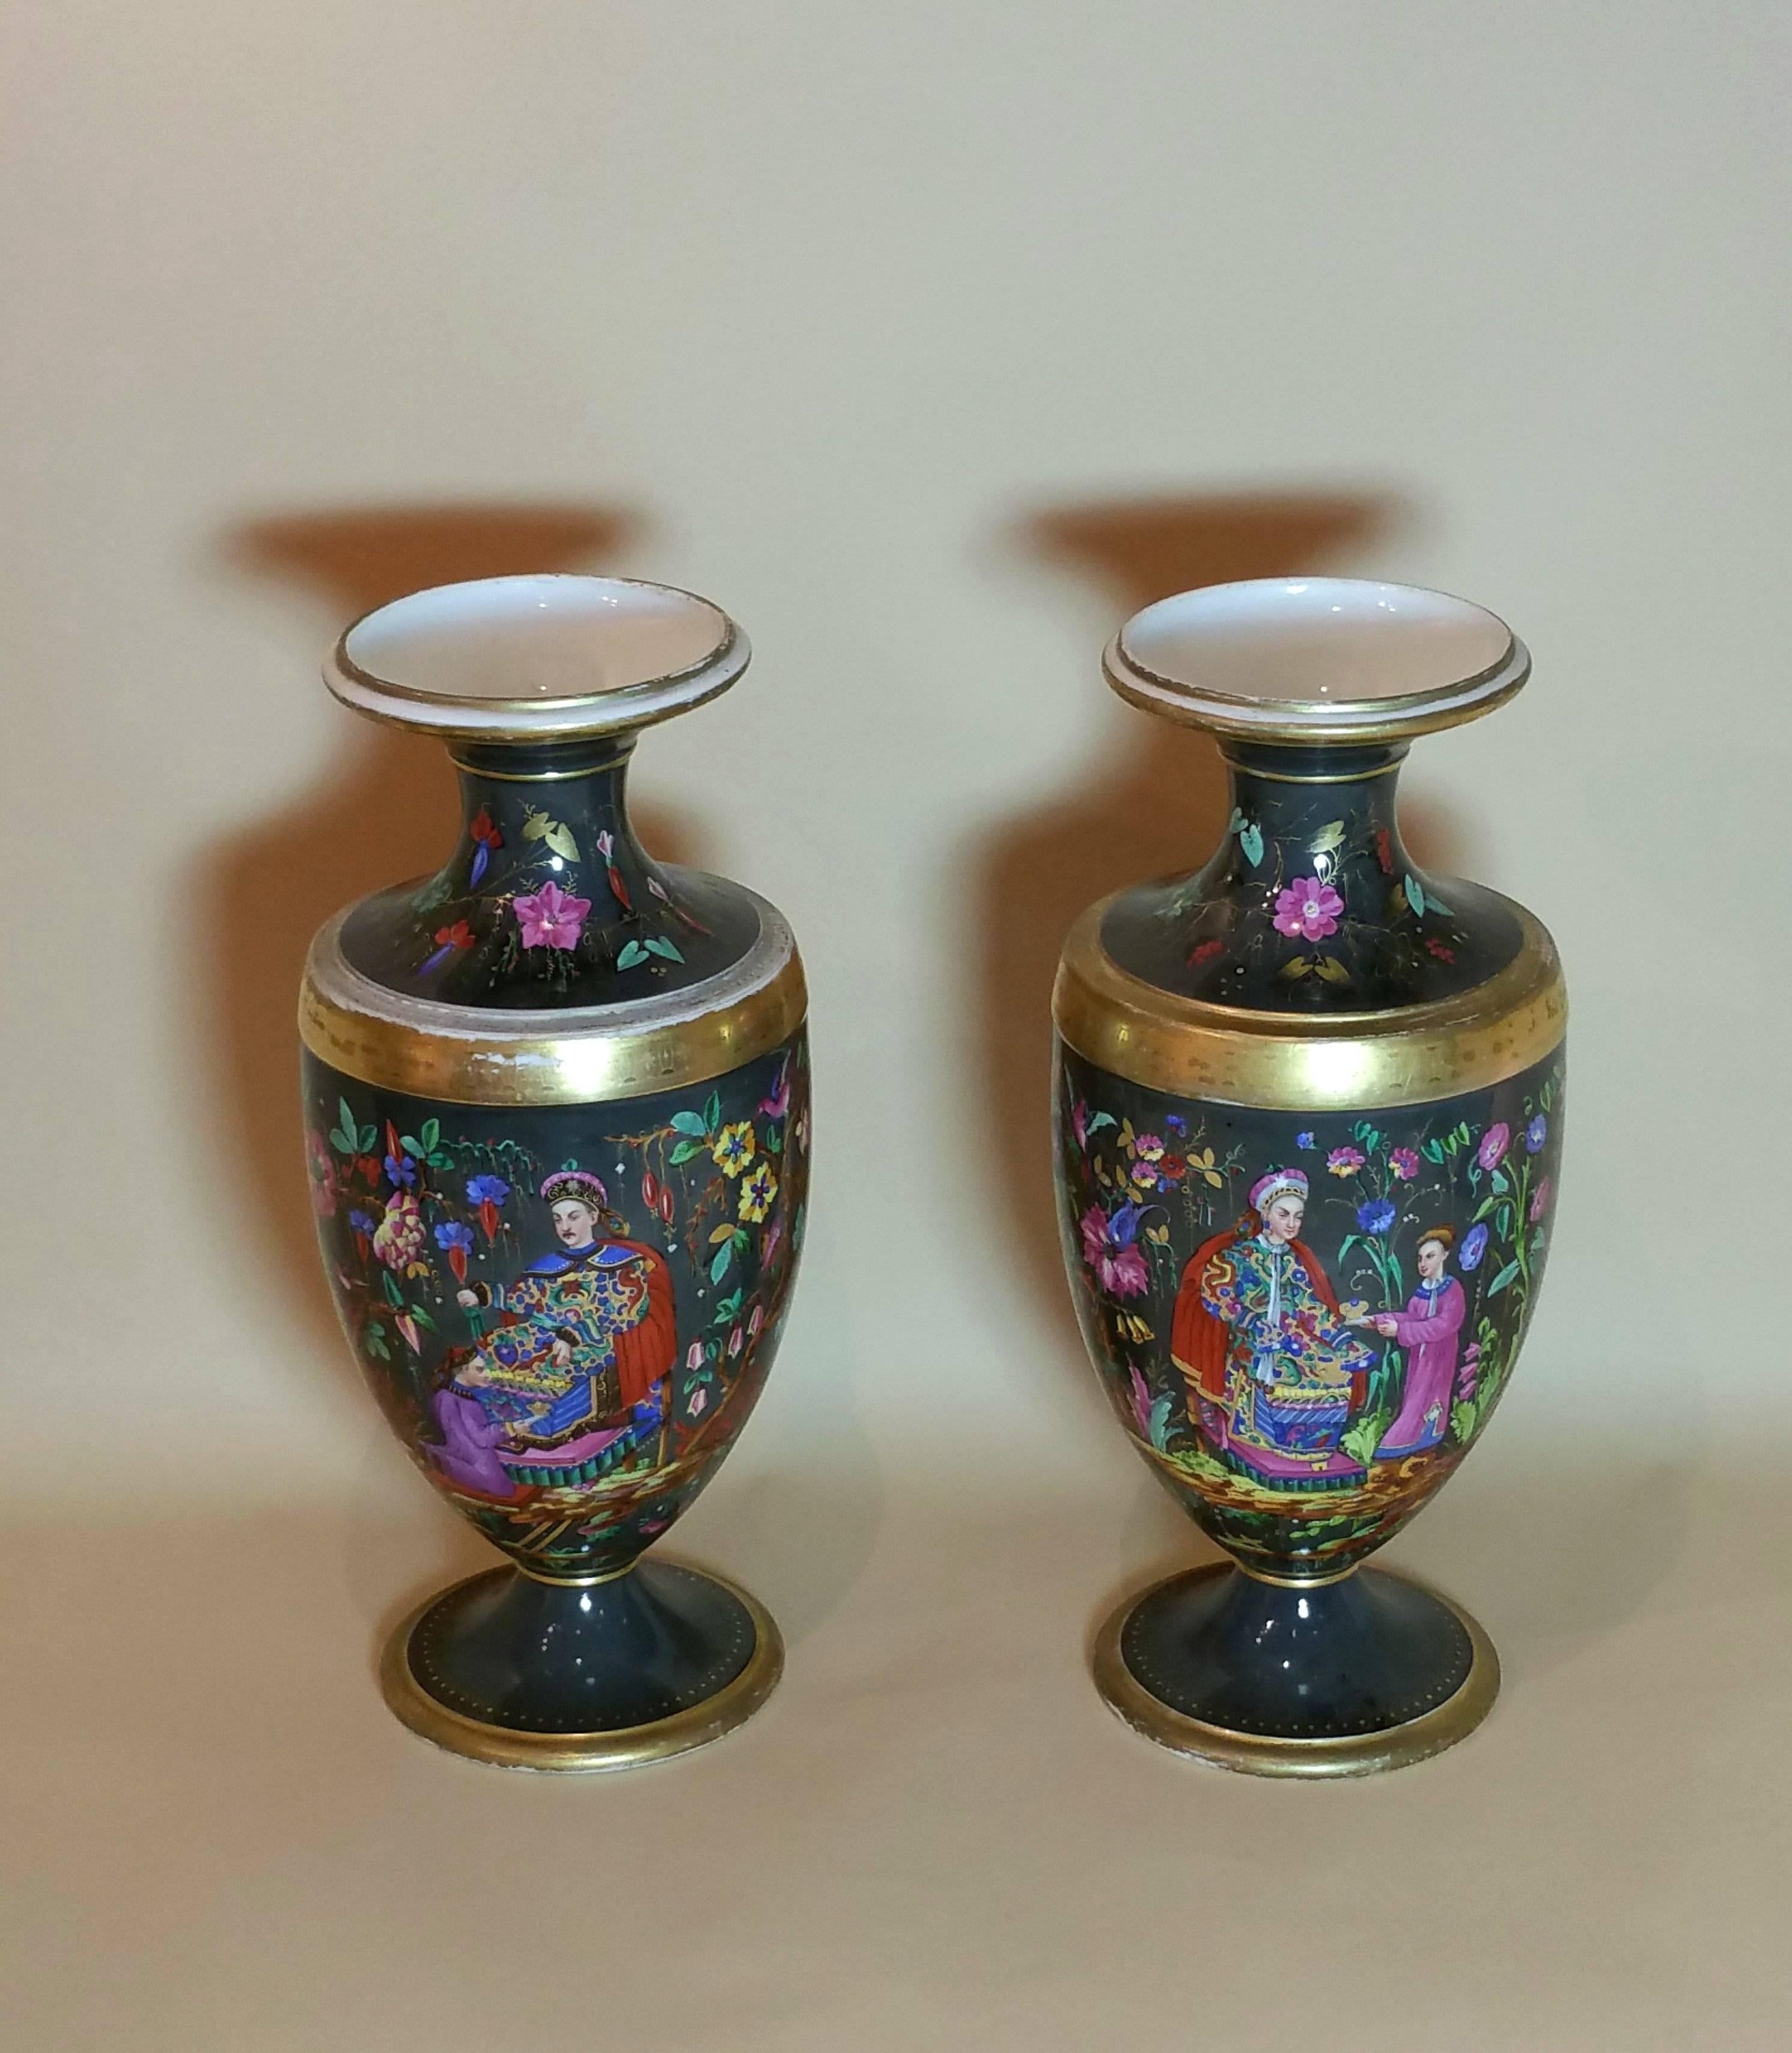 These beautiful and quite striking pair of French vases feature a painted scene with chinoiserie figures against a grey black background with gold leaf trim and are mid-19th century. They each measure 7 ½ in – 19 cm in diameter and Stand 18 ¼ in –